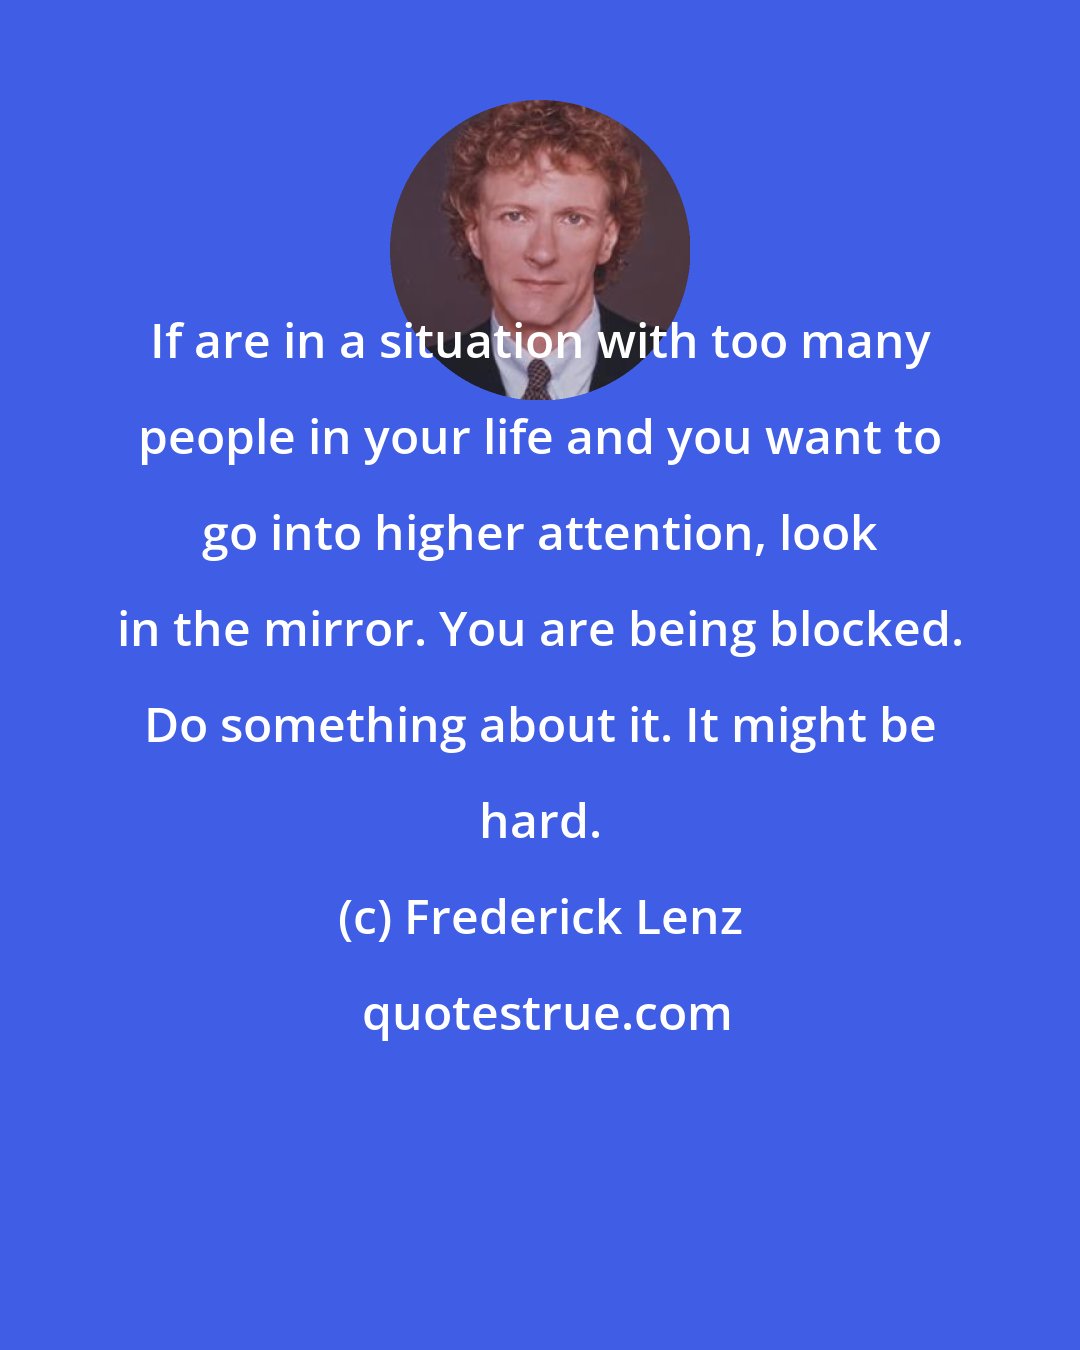 Frederick Lenz: If are in a situation with too many people in your life and you want to go into higher attention, look in the mirror. You are being blocked. Do something about it. It might be hard.